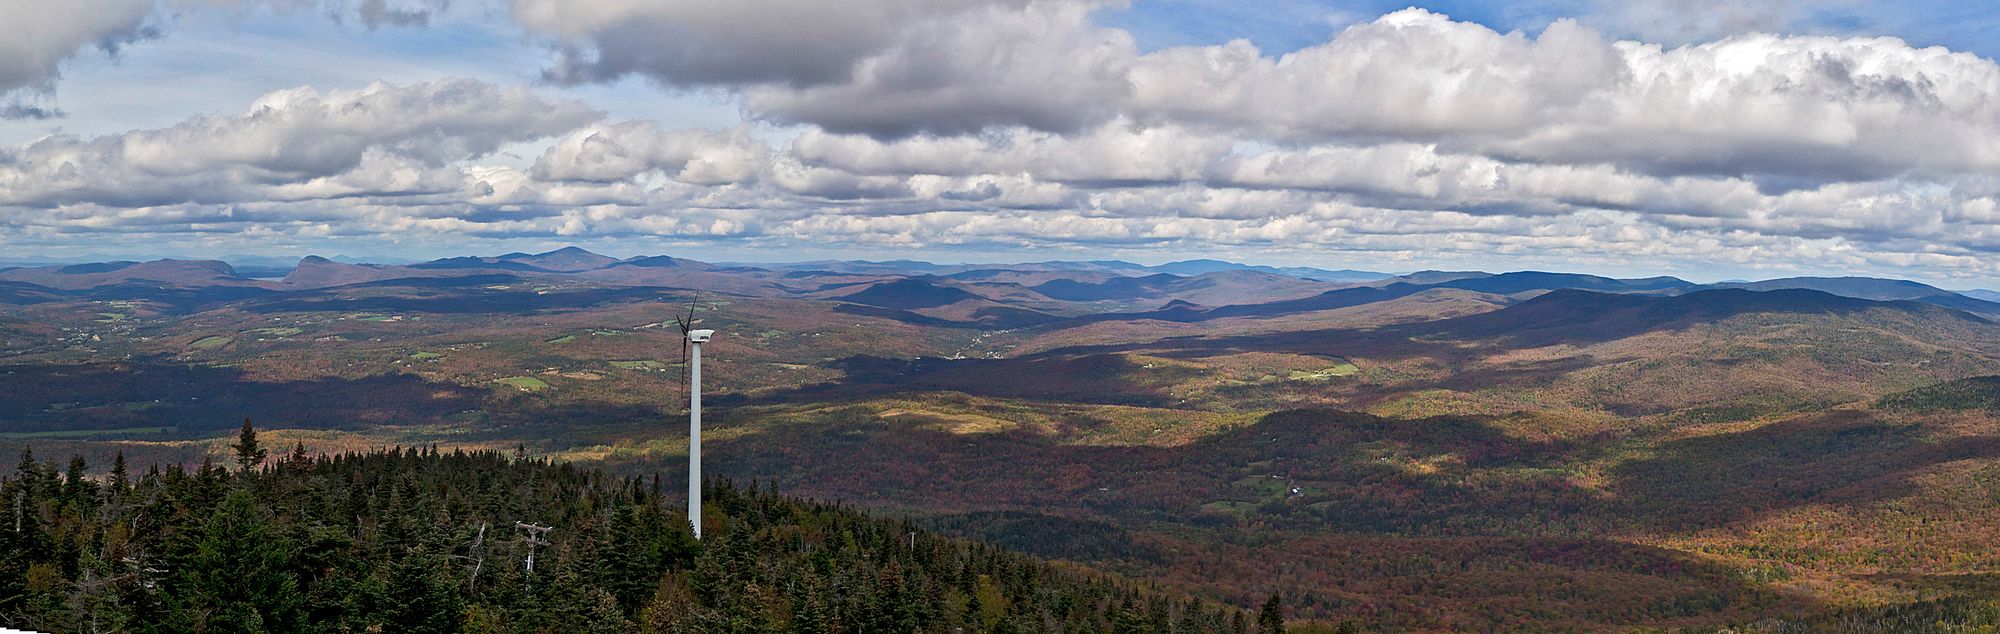 Vermont Fire Towers